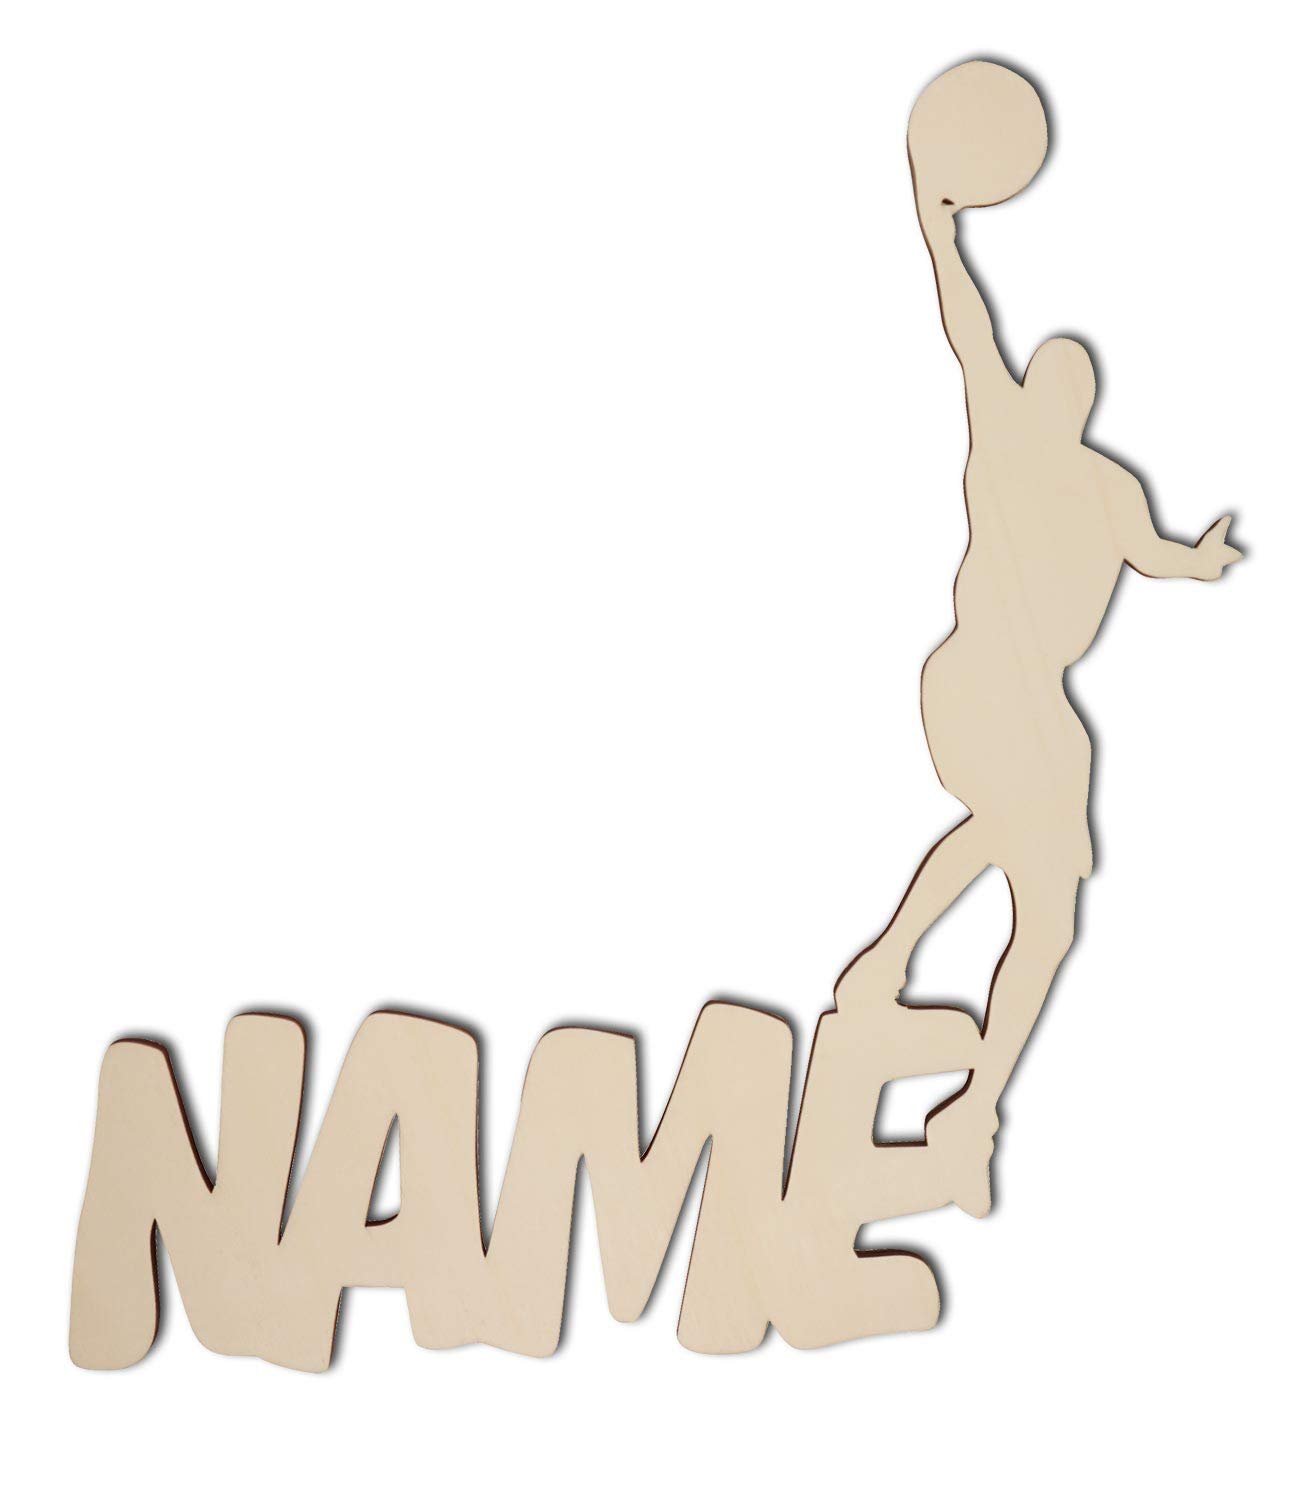 Basketball Player Lay-up – Personalized Wall Decor with optional LED Light | Starting from: